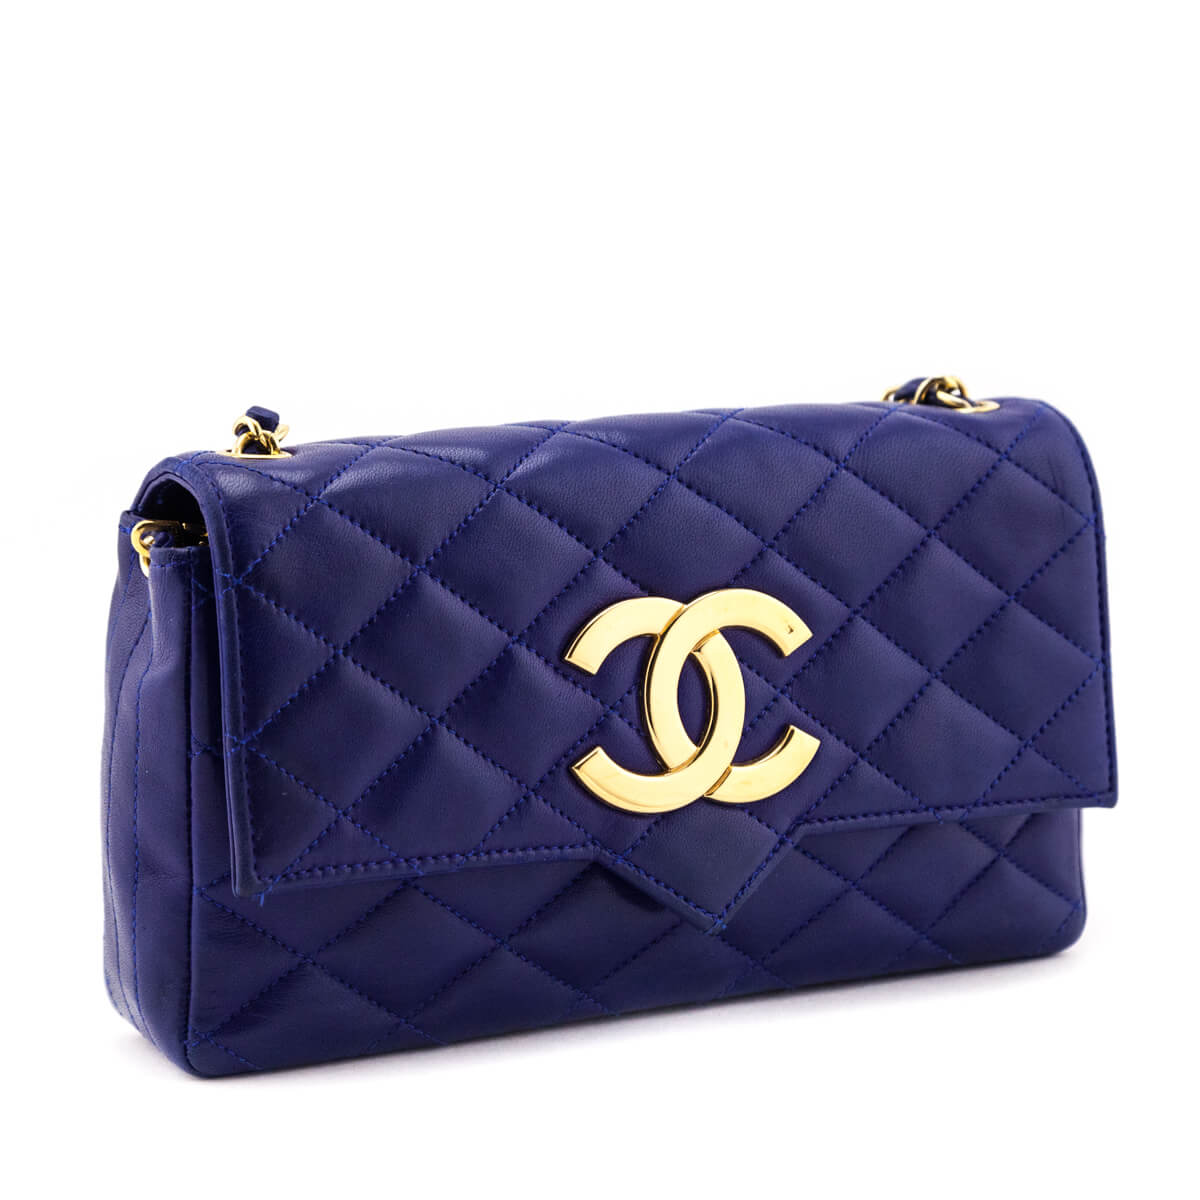 chanel purse authentic preowned